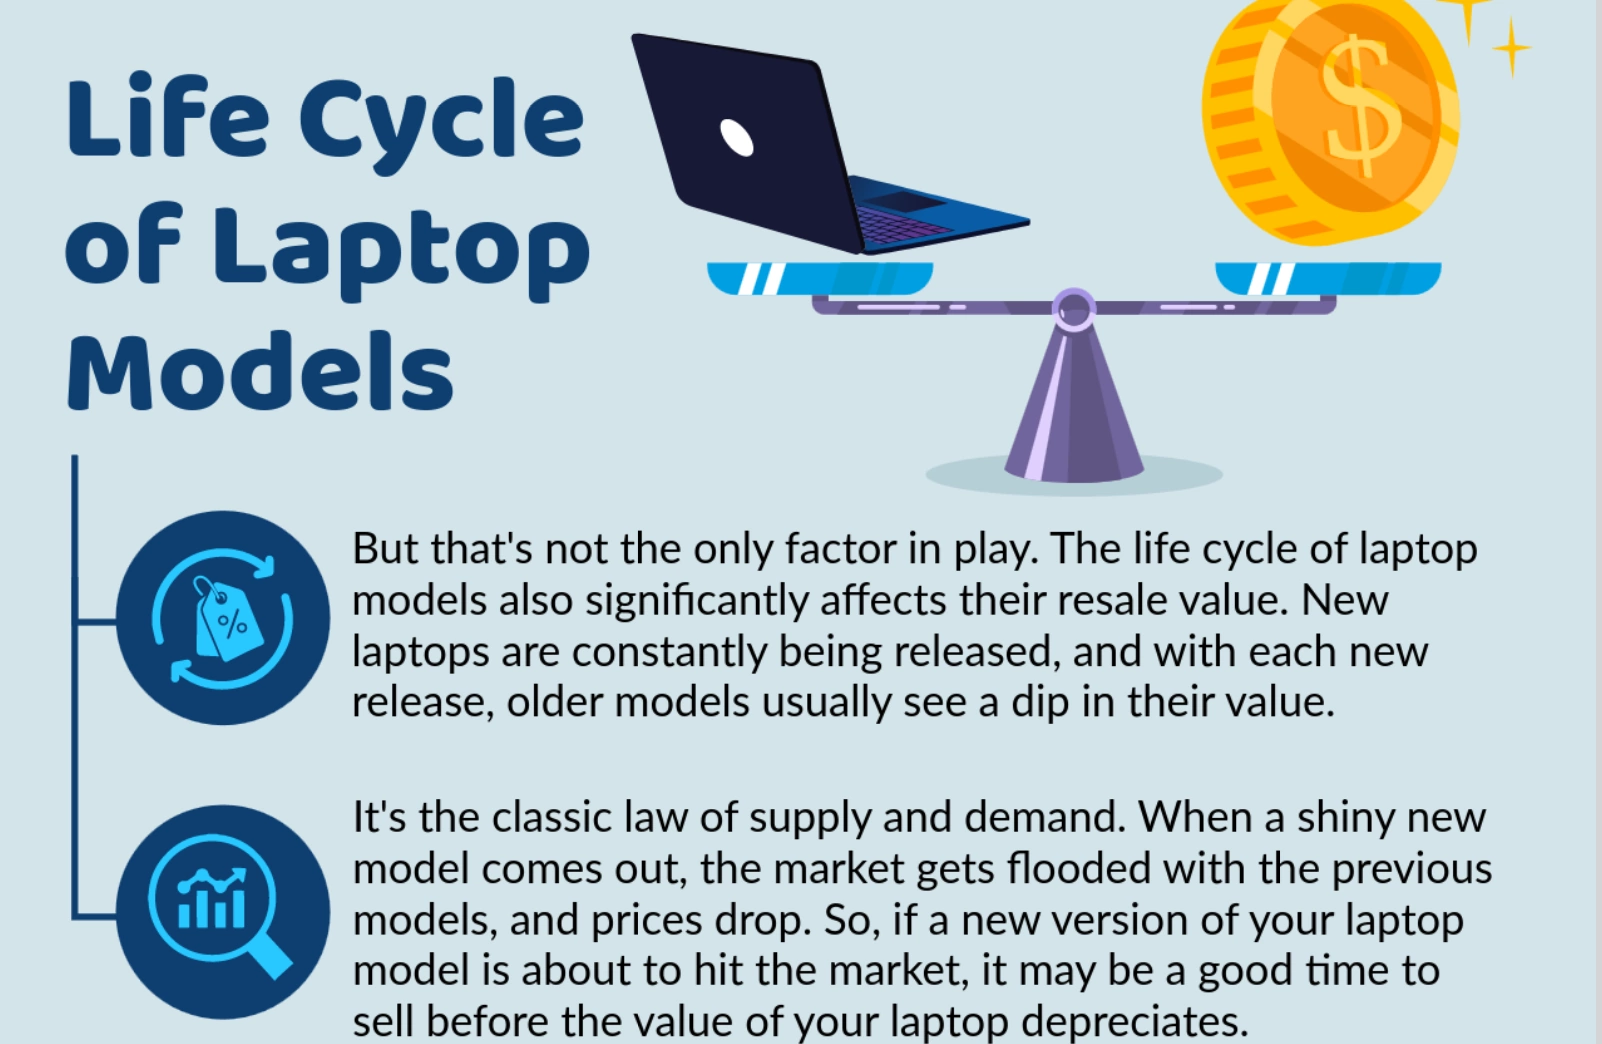 Life Cycle of Laptop Models